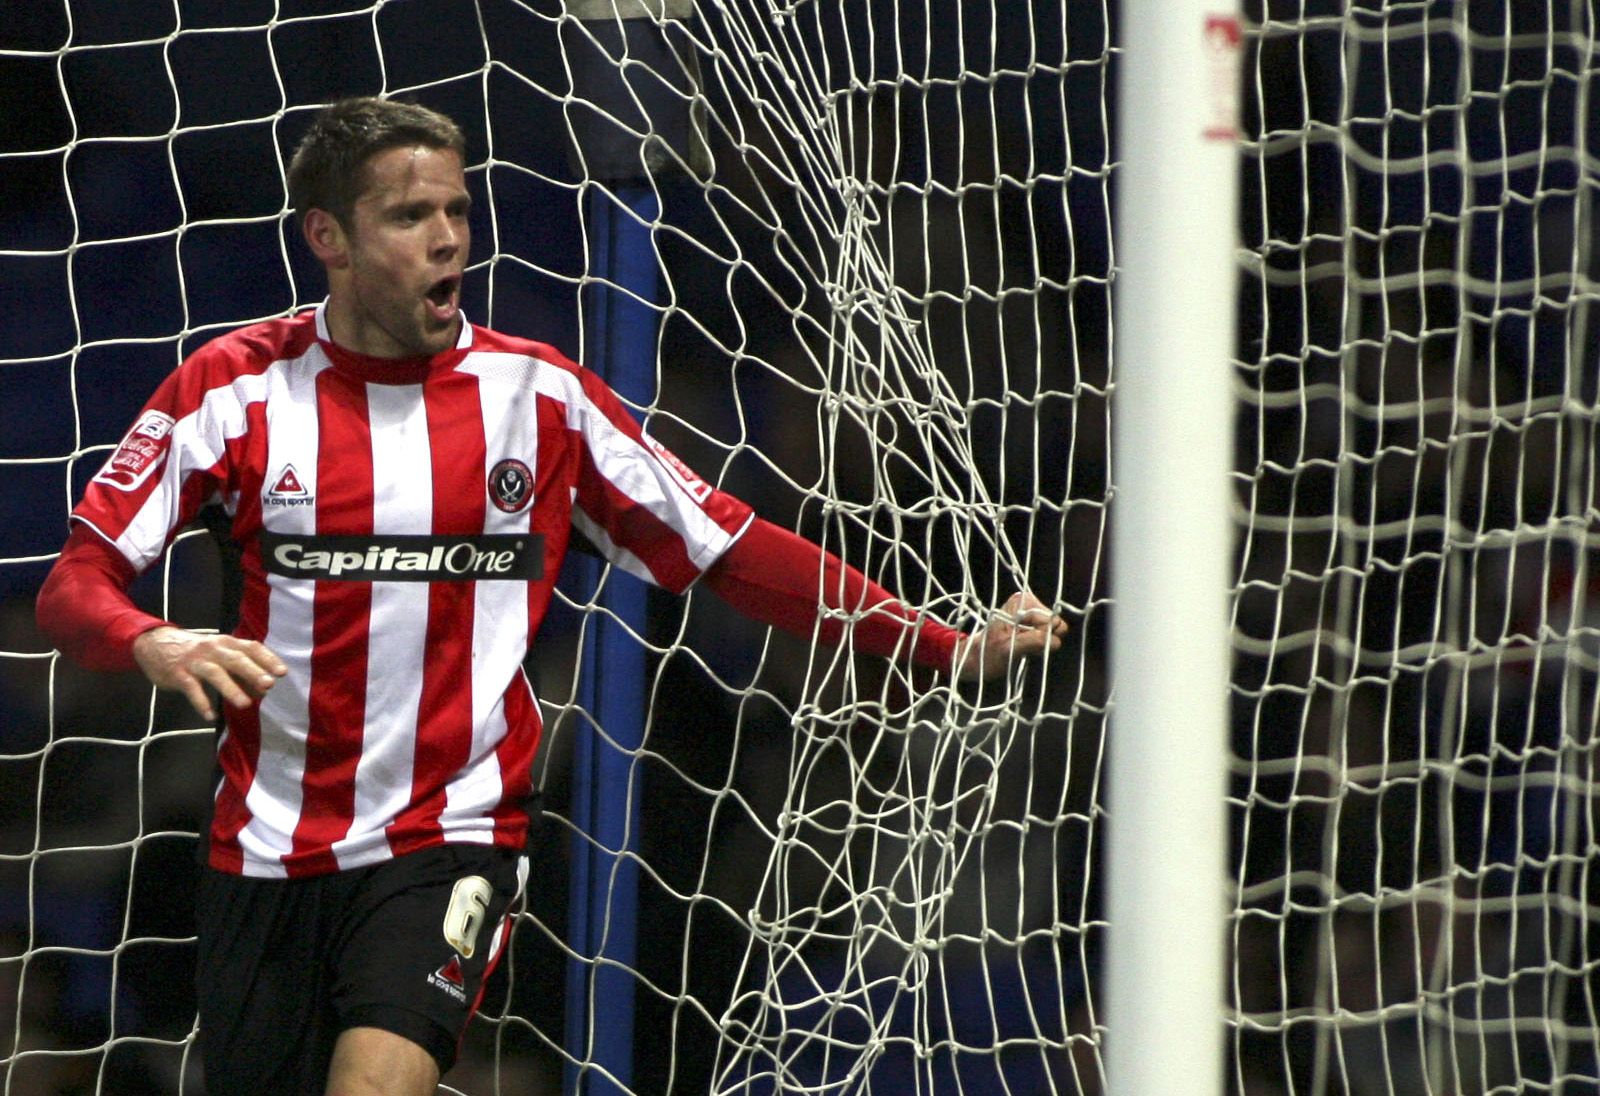 Football - Ipswich Town v Sheffield United Coca-Cola Football League Championship  - Portman Road - 4/3/08 
James Beattie celebrates scoring the first goal for Sheffield United  
Mandatory Credit: Action Images / Lee Mills 
Livepic